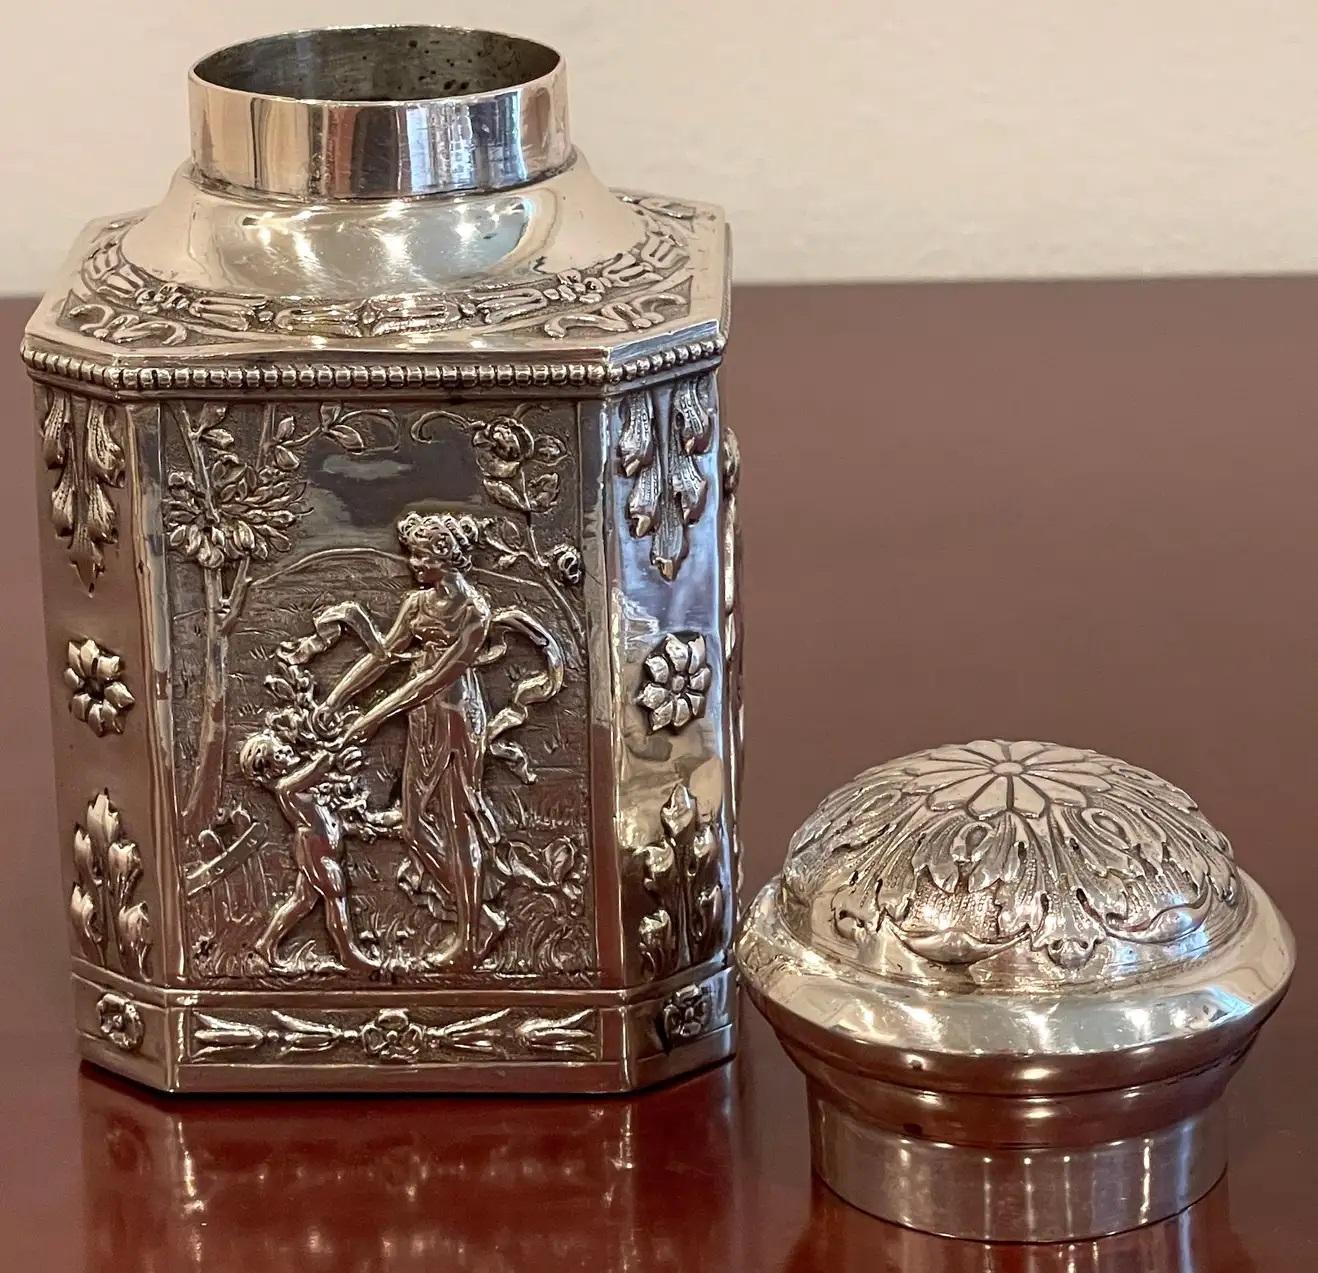 Antique French Sterling neoclassical 'Four Seasons' tea caddy
France, circa 1880s

A hefty, highly detailed silver tea caddy/ box, with removable acanthus/ floret motif circular lid, resting on a squared hexagonal base, each side representing the